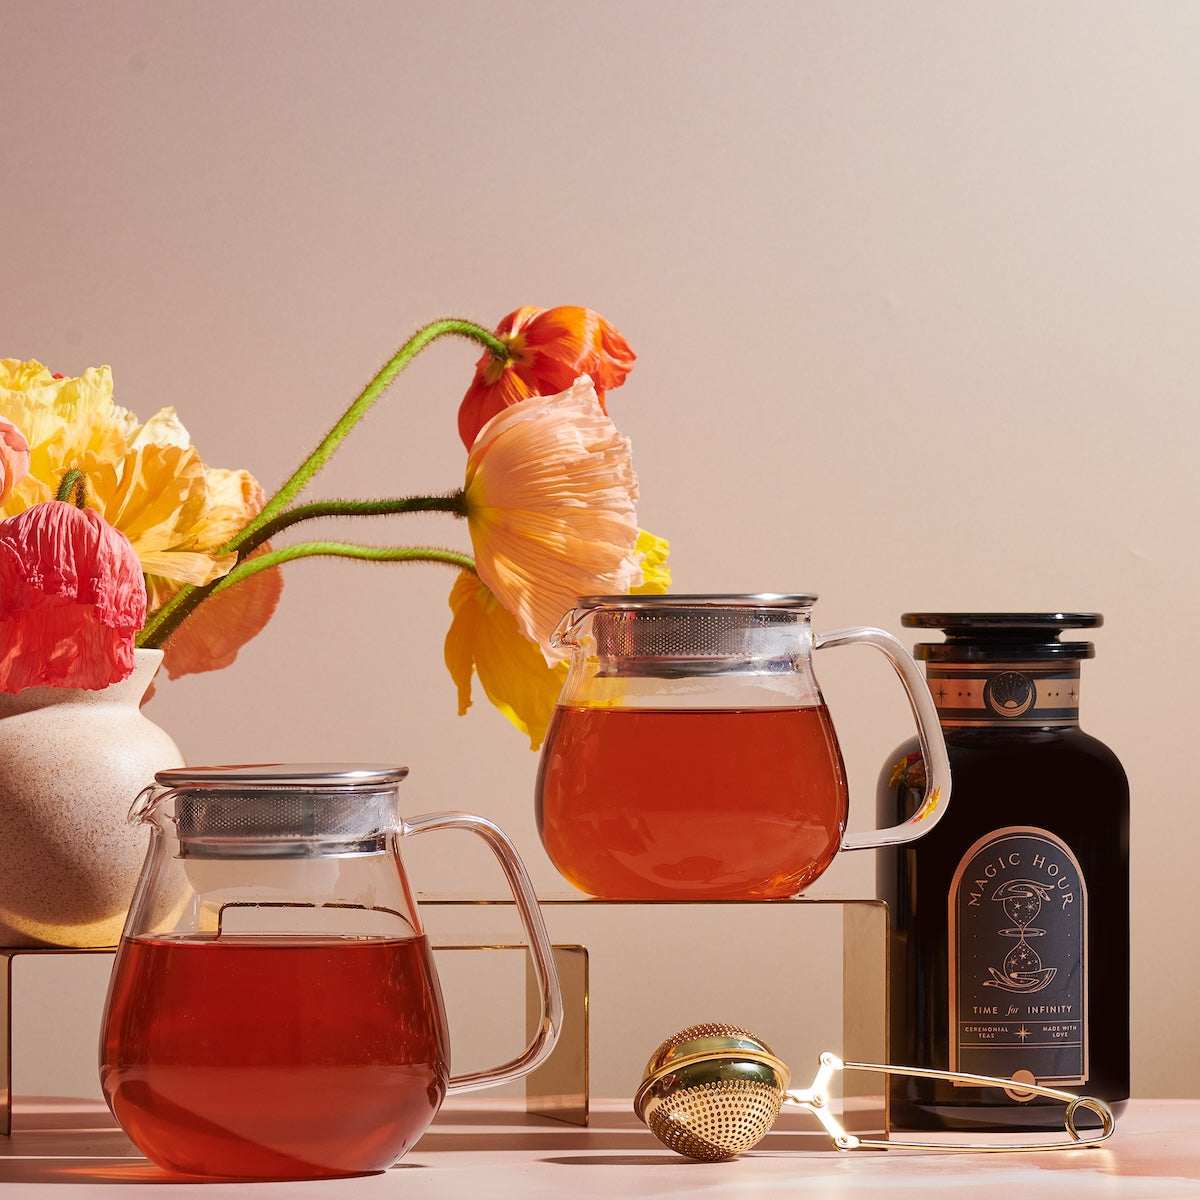 Two Kinto One Touch Teapots filled with organic tea are placed on a table, accompanied by a jar labeled "Magic Hour." A gold tea infuser and string lights lie in the foreground. In the background, there's a ceramic vase with colorful flowers and a soft, warm light illuminating the scene.